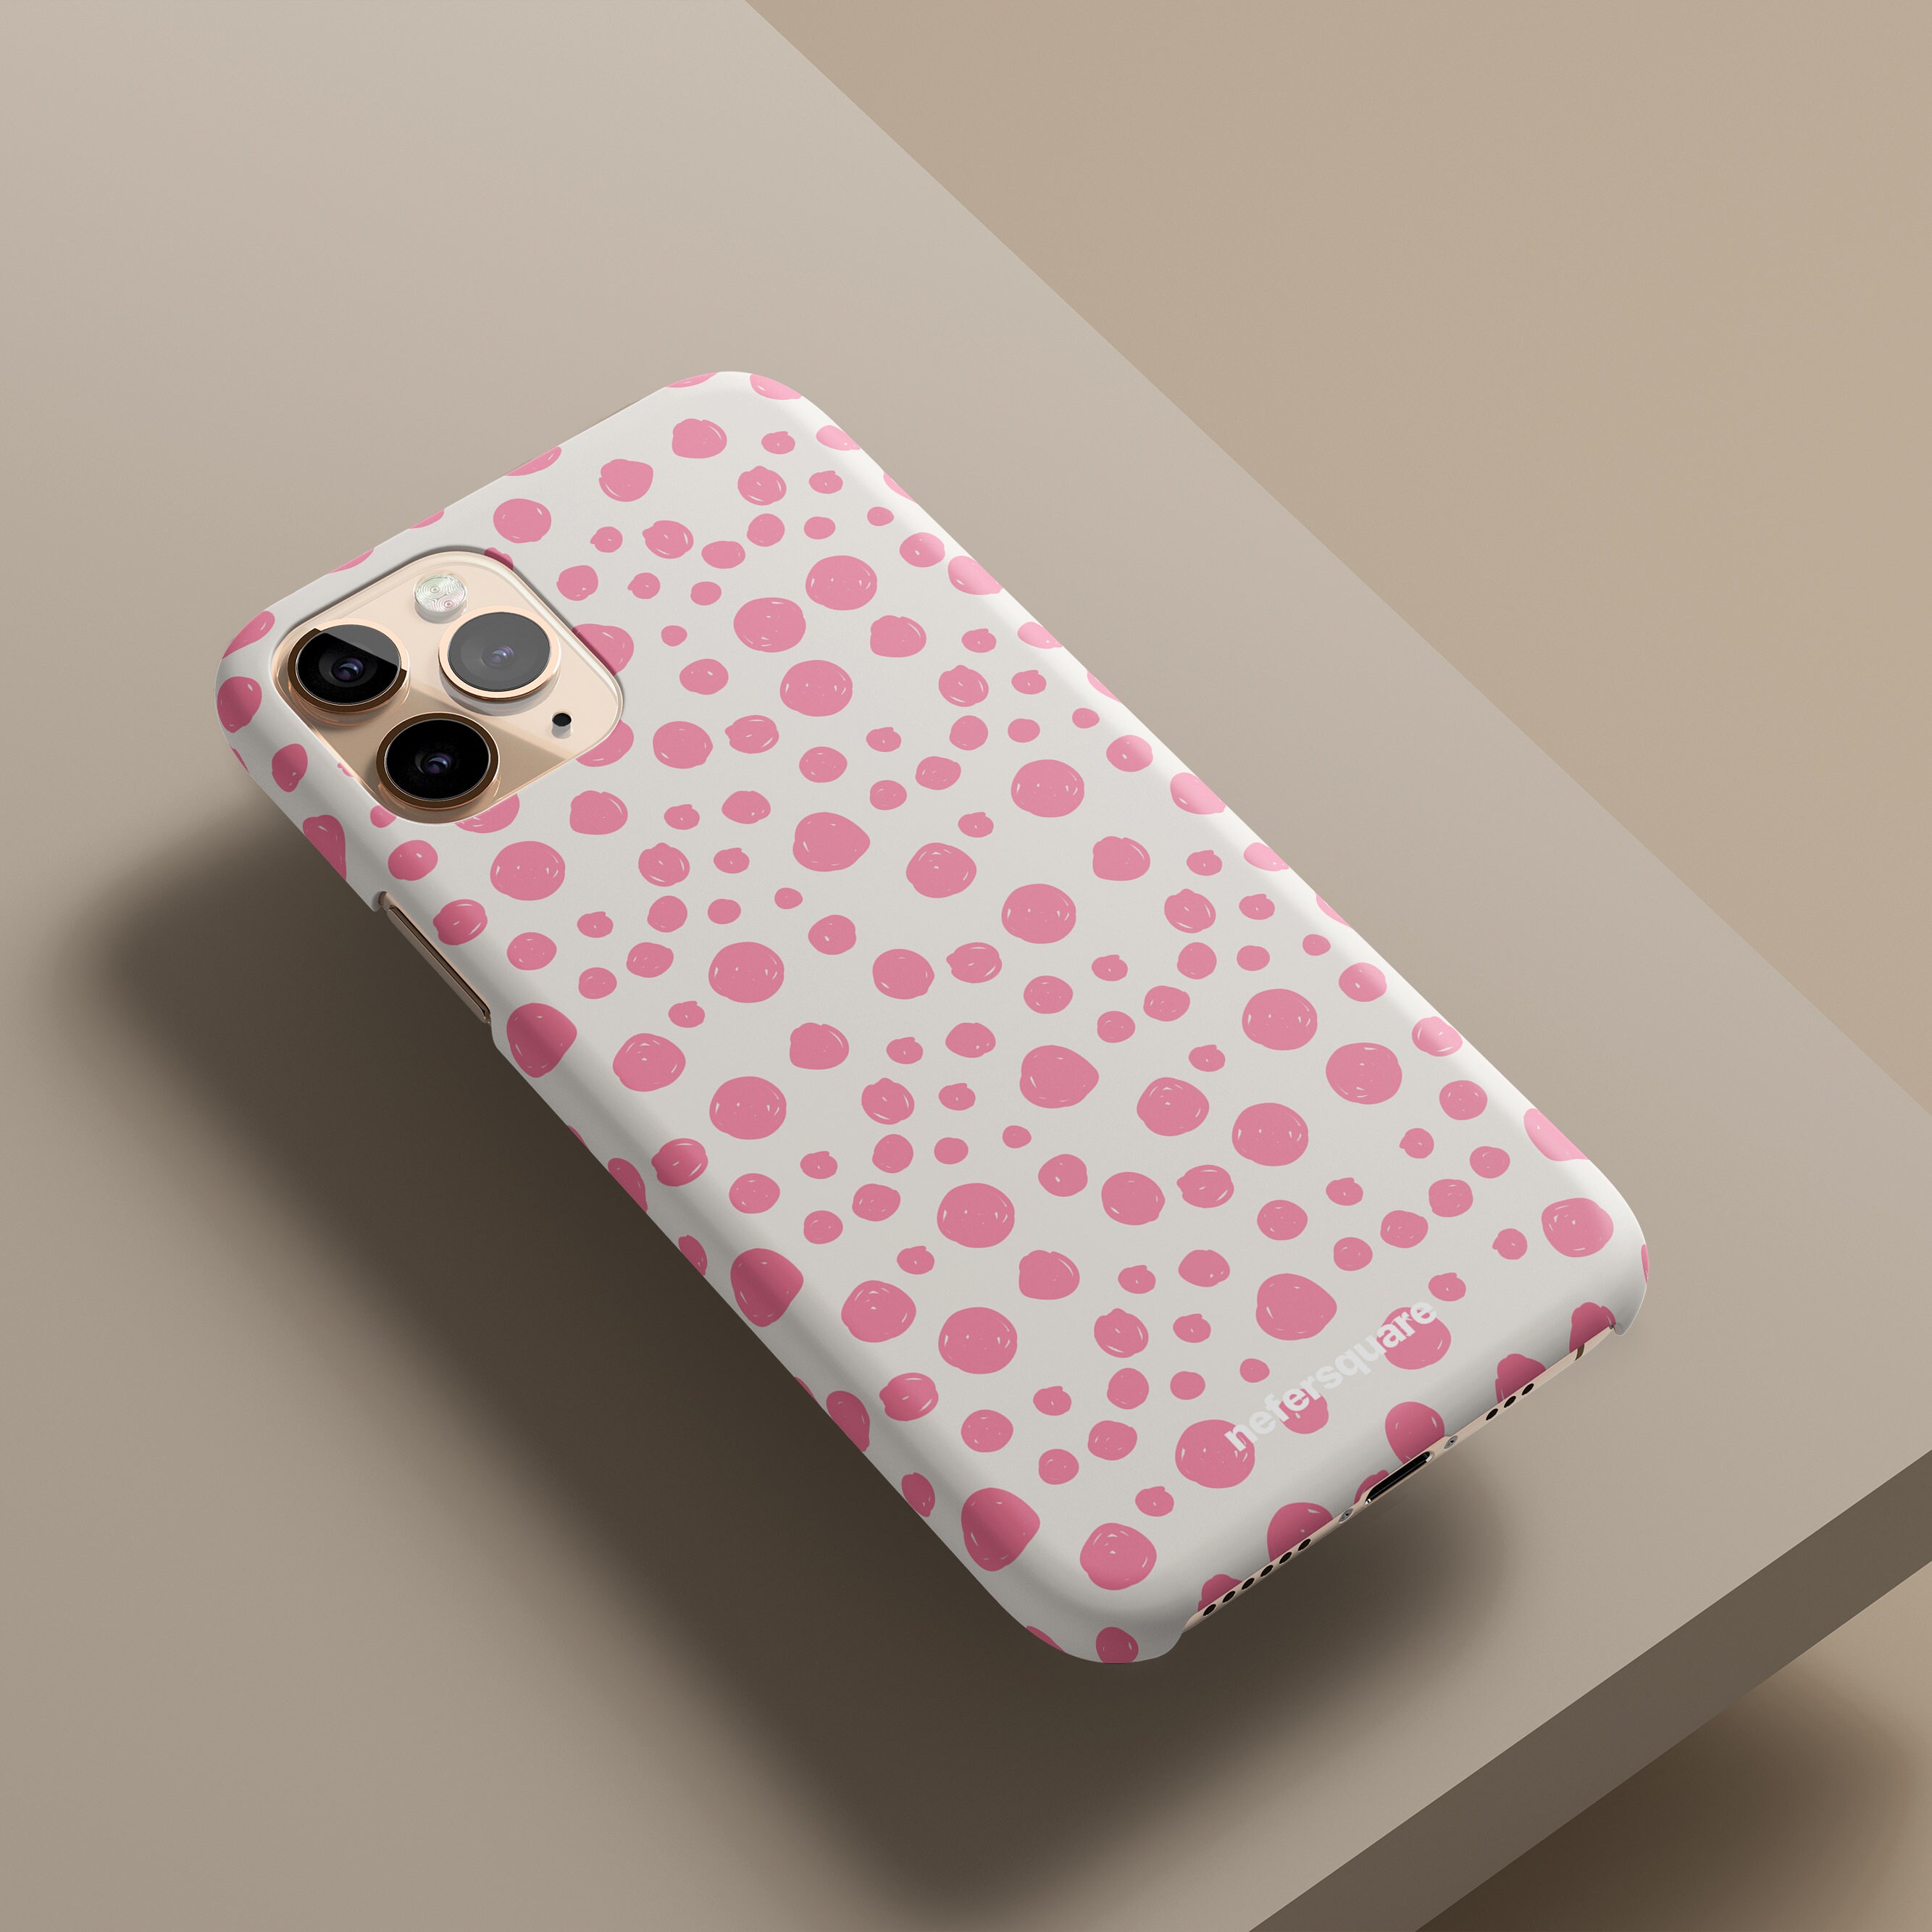 Pink Polka Dots iPhone 12 case iPhone 12 Pro case iPhone 11 | Etsy